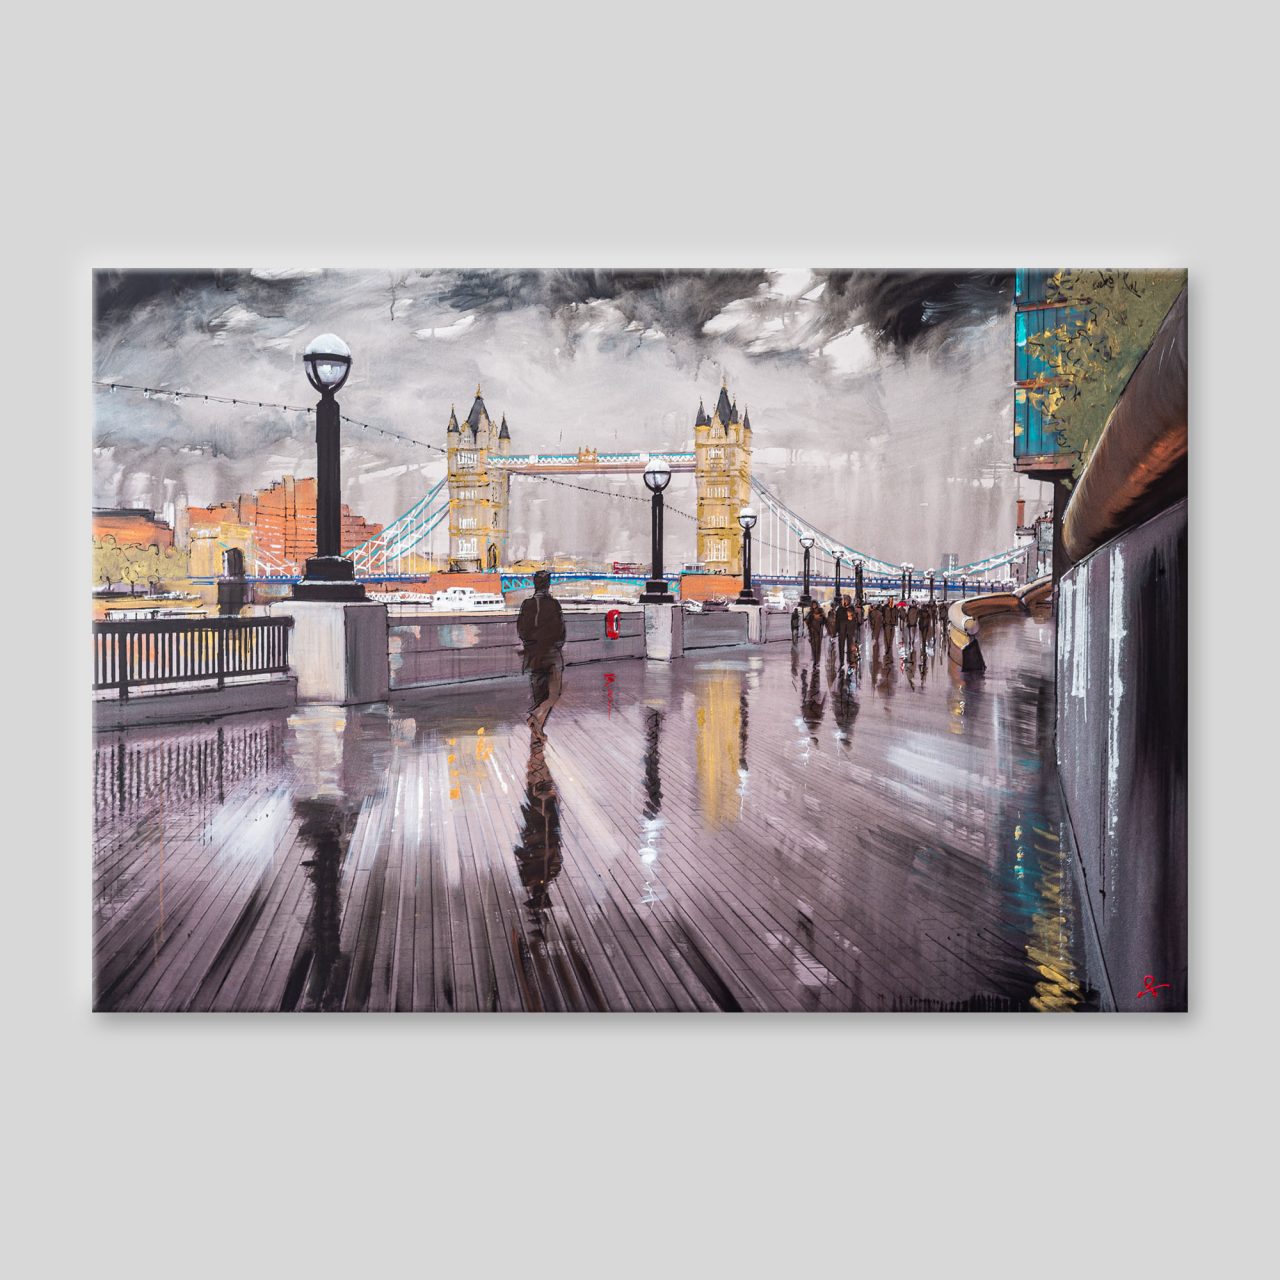 Tower Bridge Glistens by Paul Kenton, UK Contemporary artist, a London River Thames Cityscape original painting from his London Art Collection